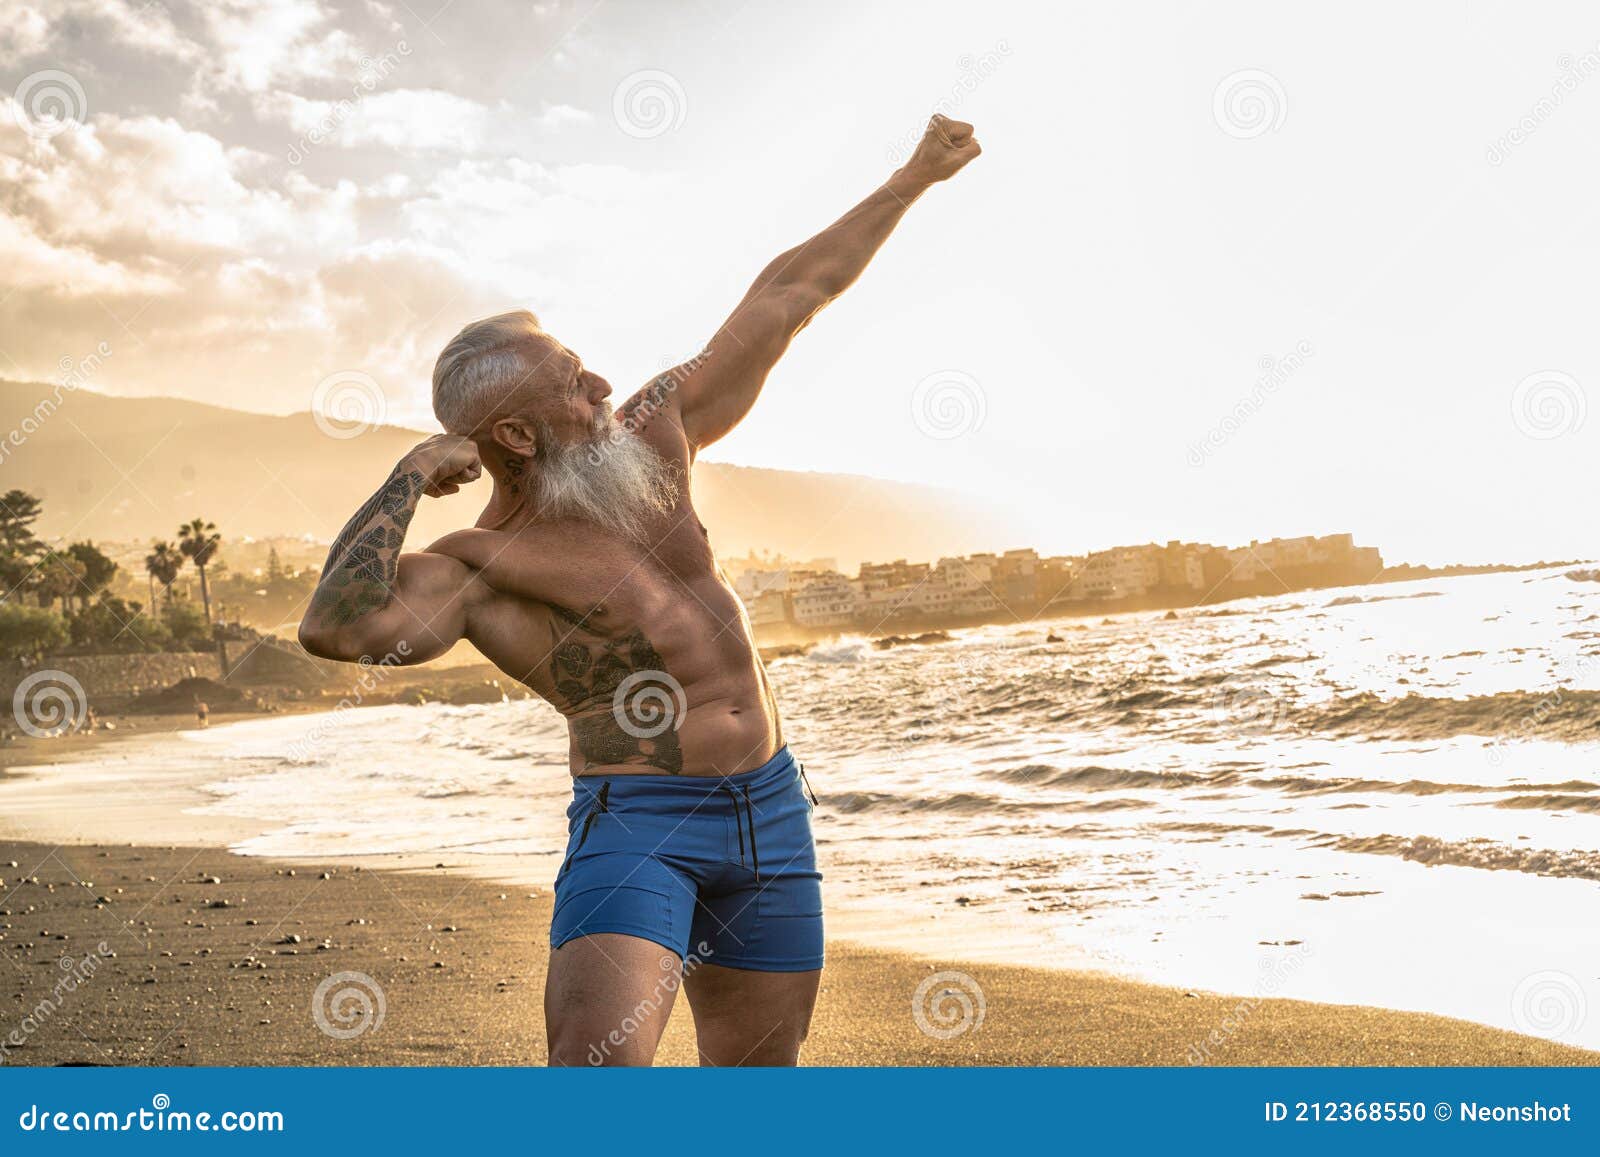 age is just a number. in a healthy body, healthy mind. senior man with white stylish beard showing his muscular fit body with